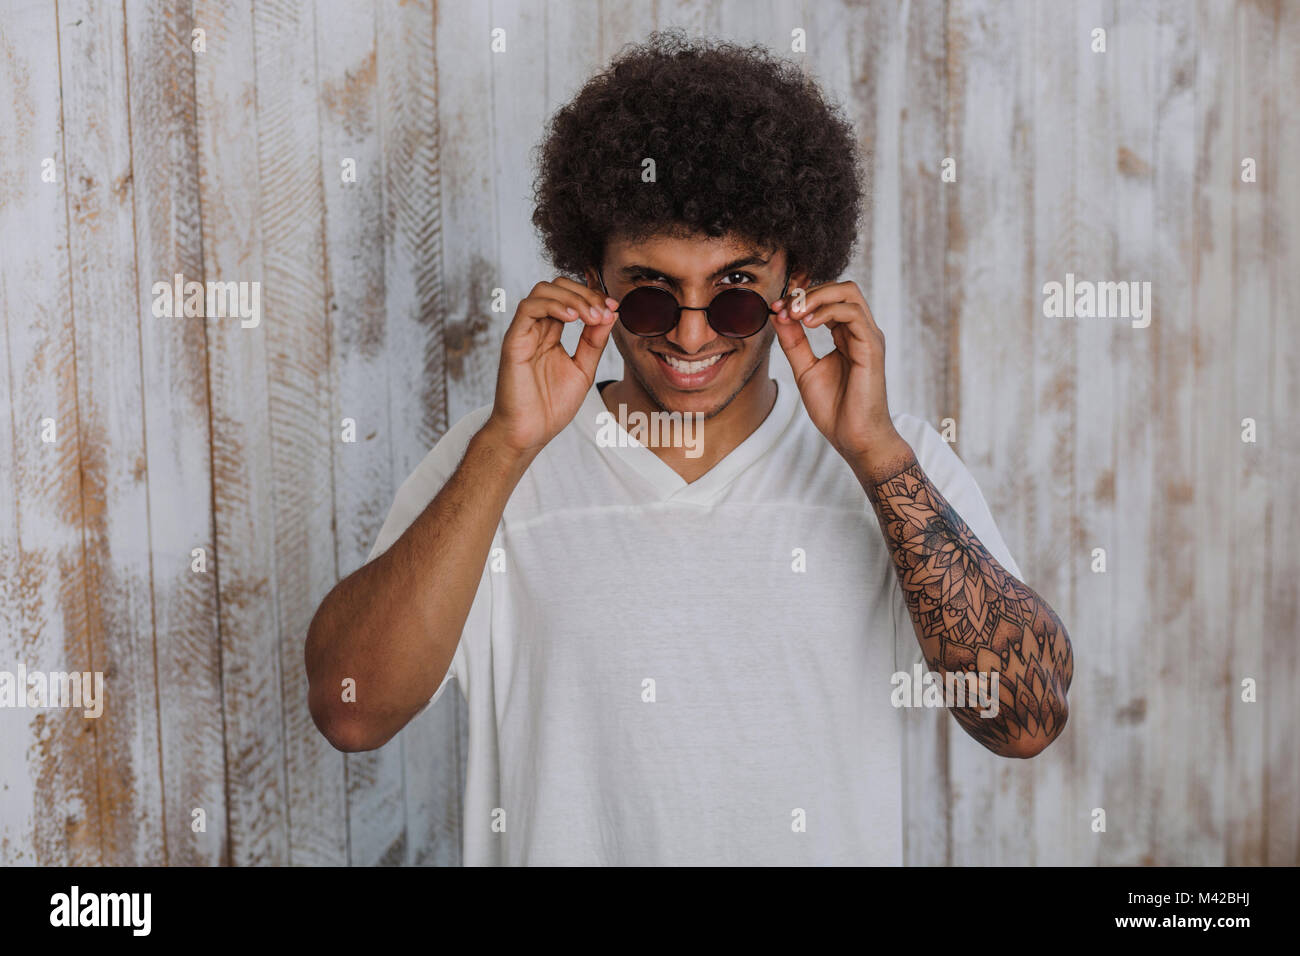 Smile!portrait  curly and an African man  adjusting his sunglasses and winks. while standing against old wooden background Stock Photo